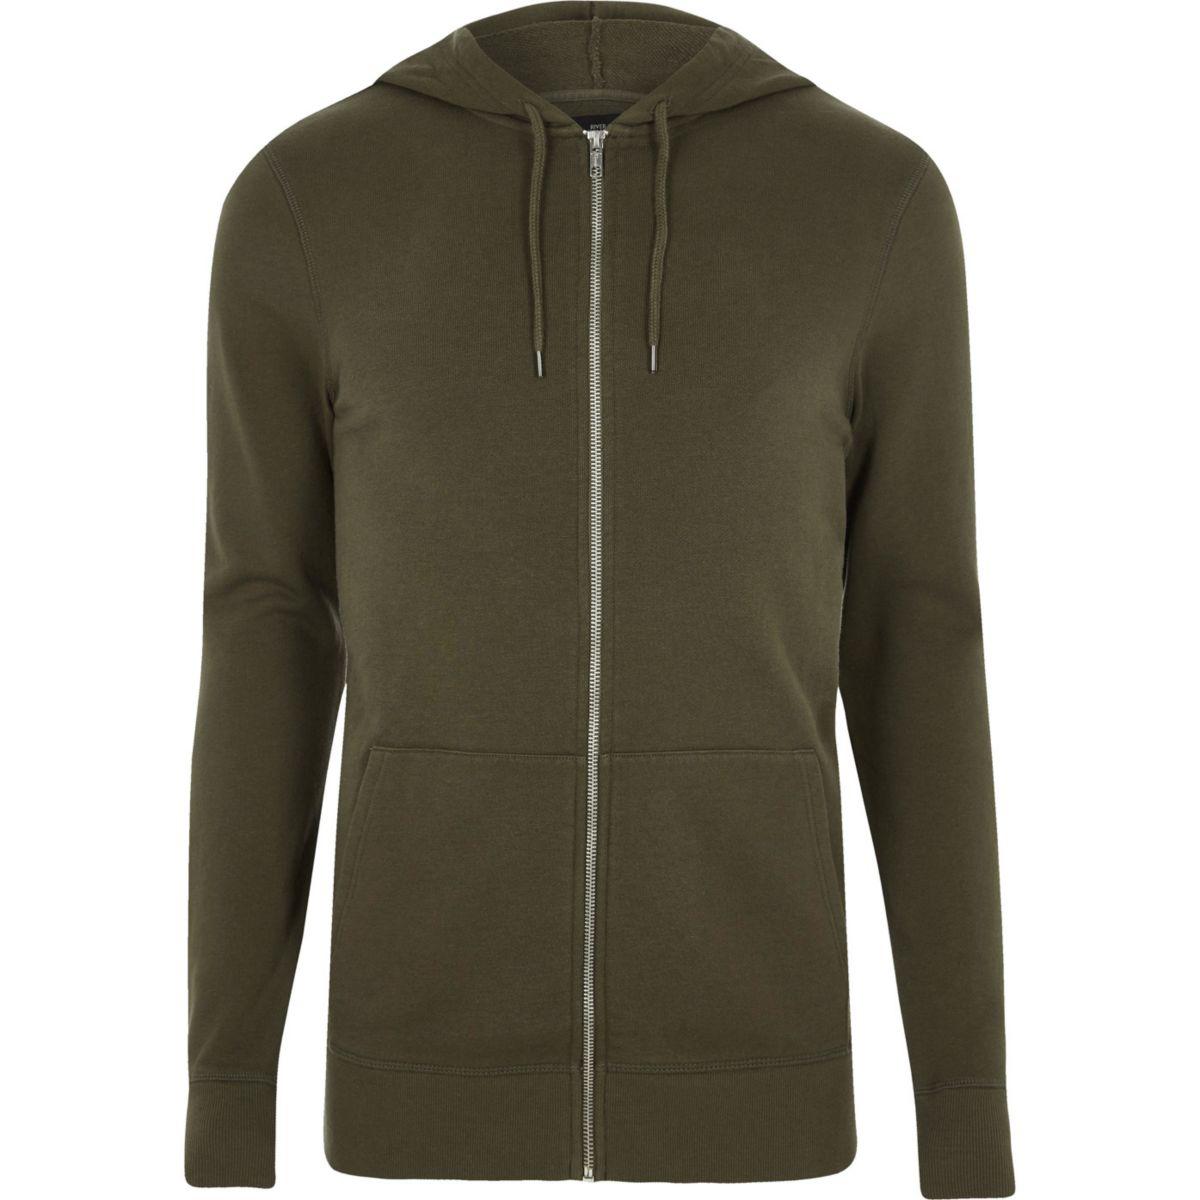 Lyst - River Island Khaki Green Muscle Fit Zip Up Hoodie for Men